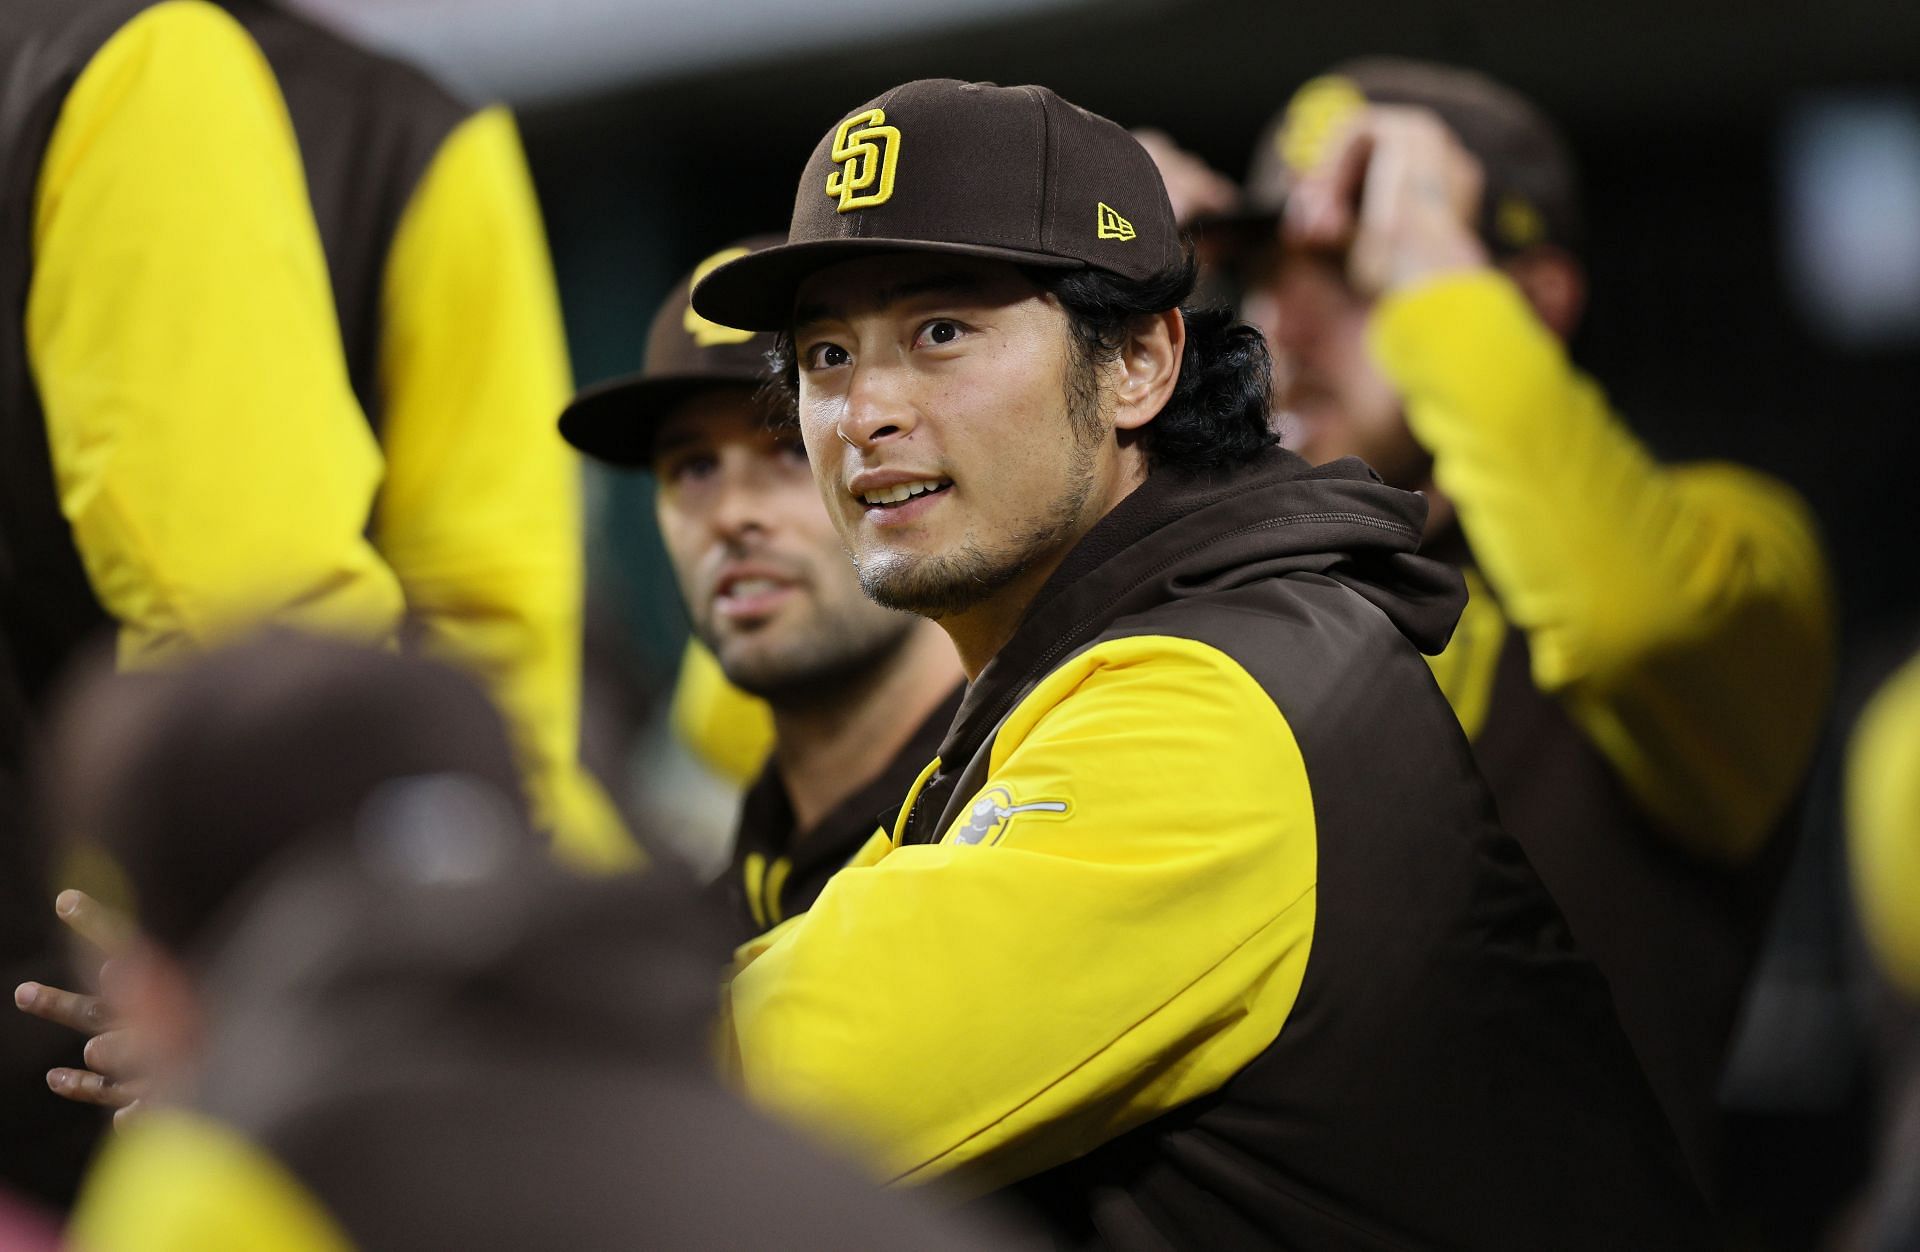 Yu Darvish has a tricky but possible fit with the Mariners - Lookout Landing